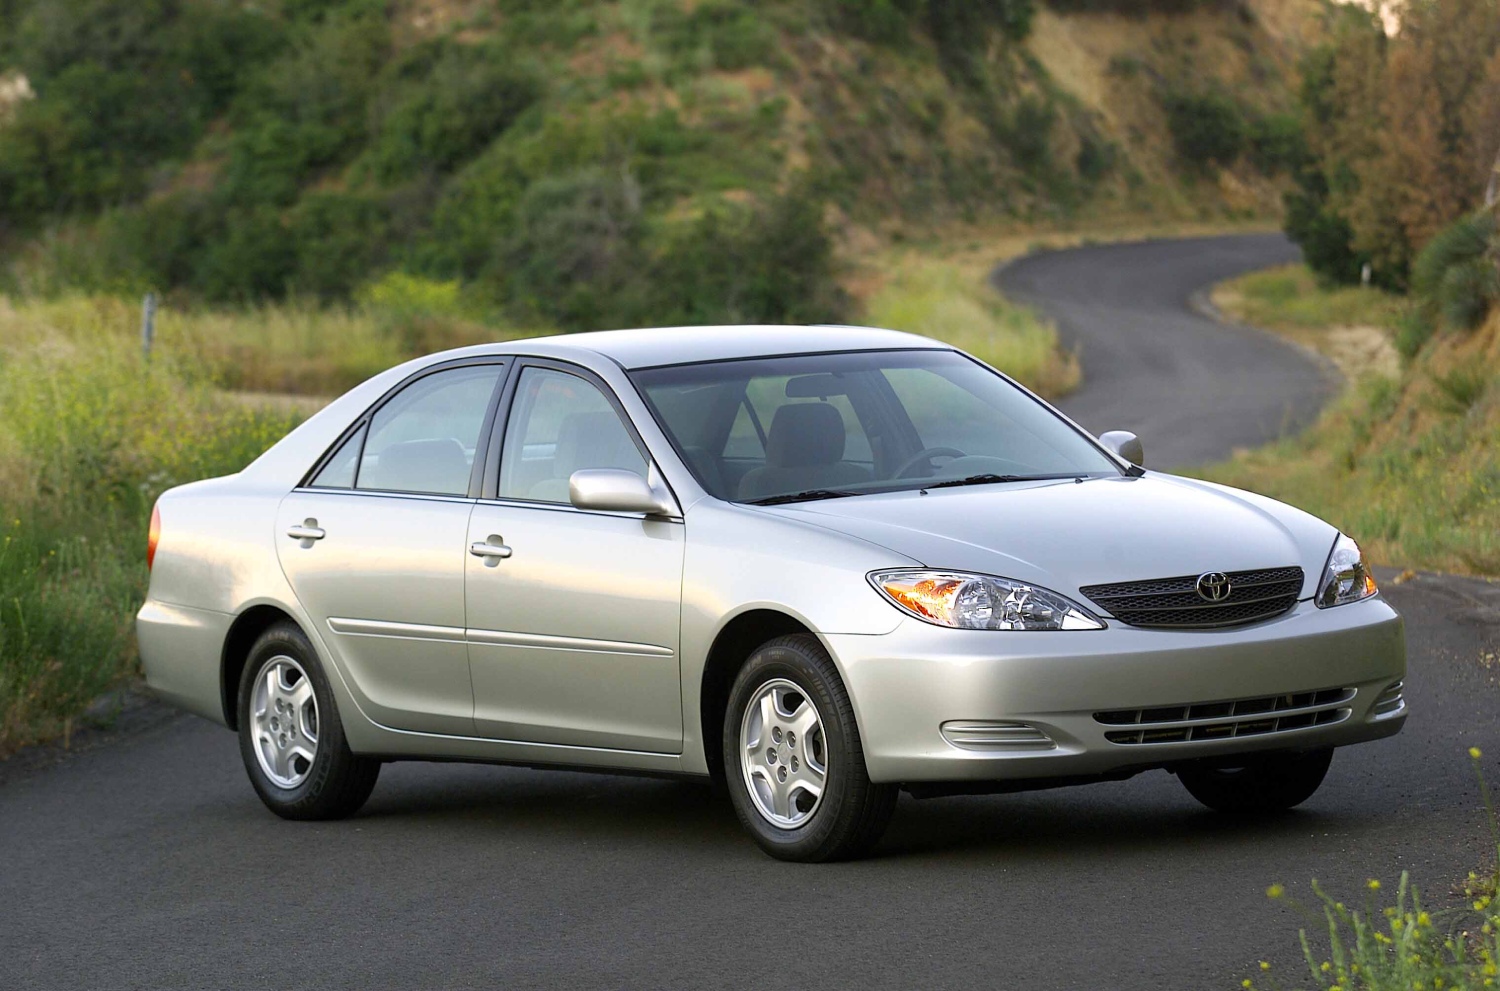 How Long Will a 2006 Toyota Camry Last?